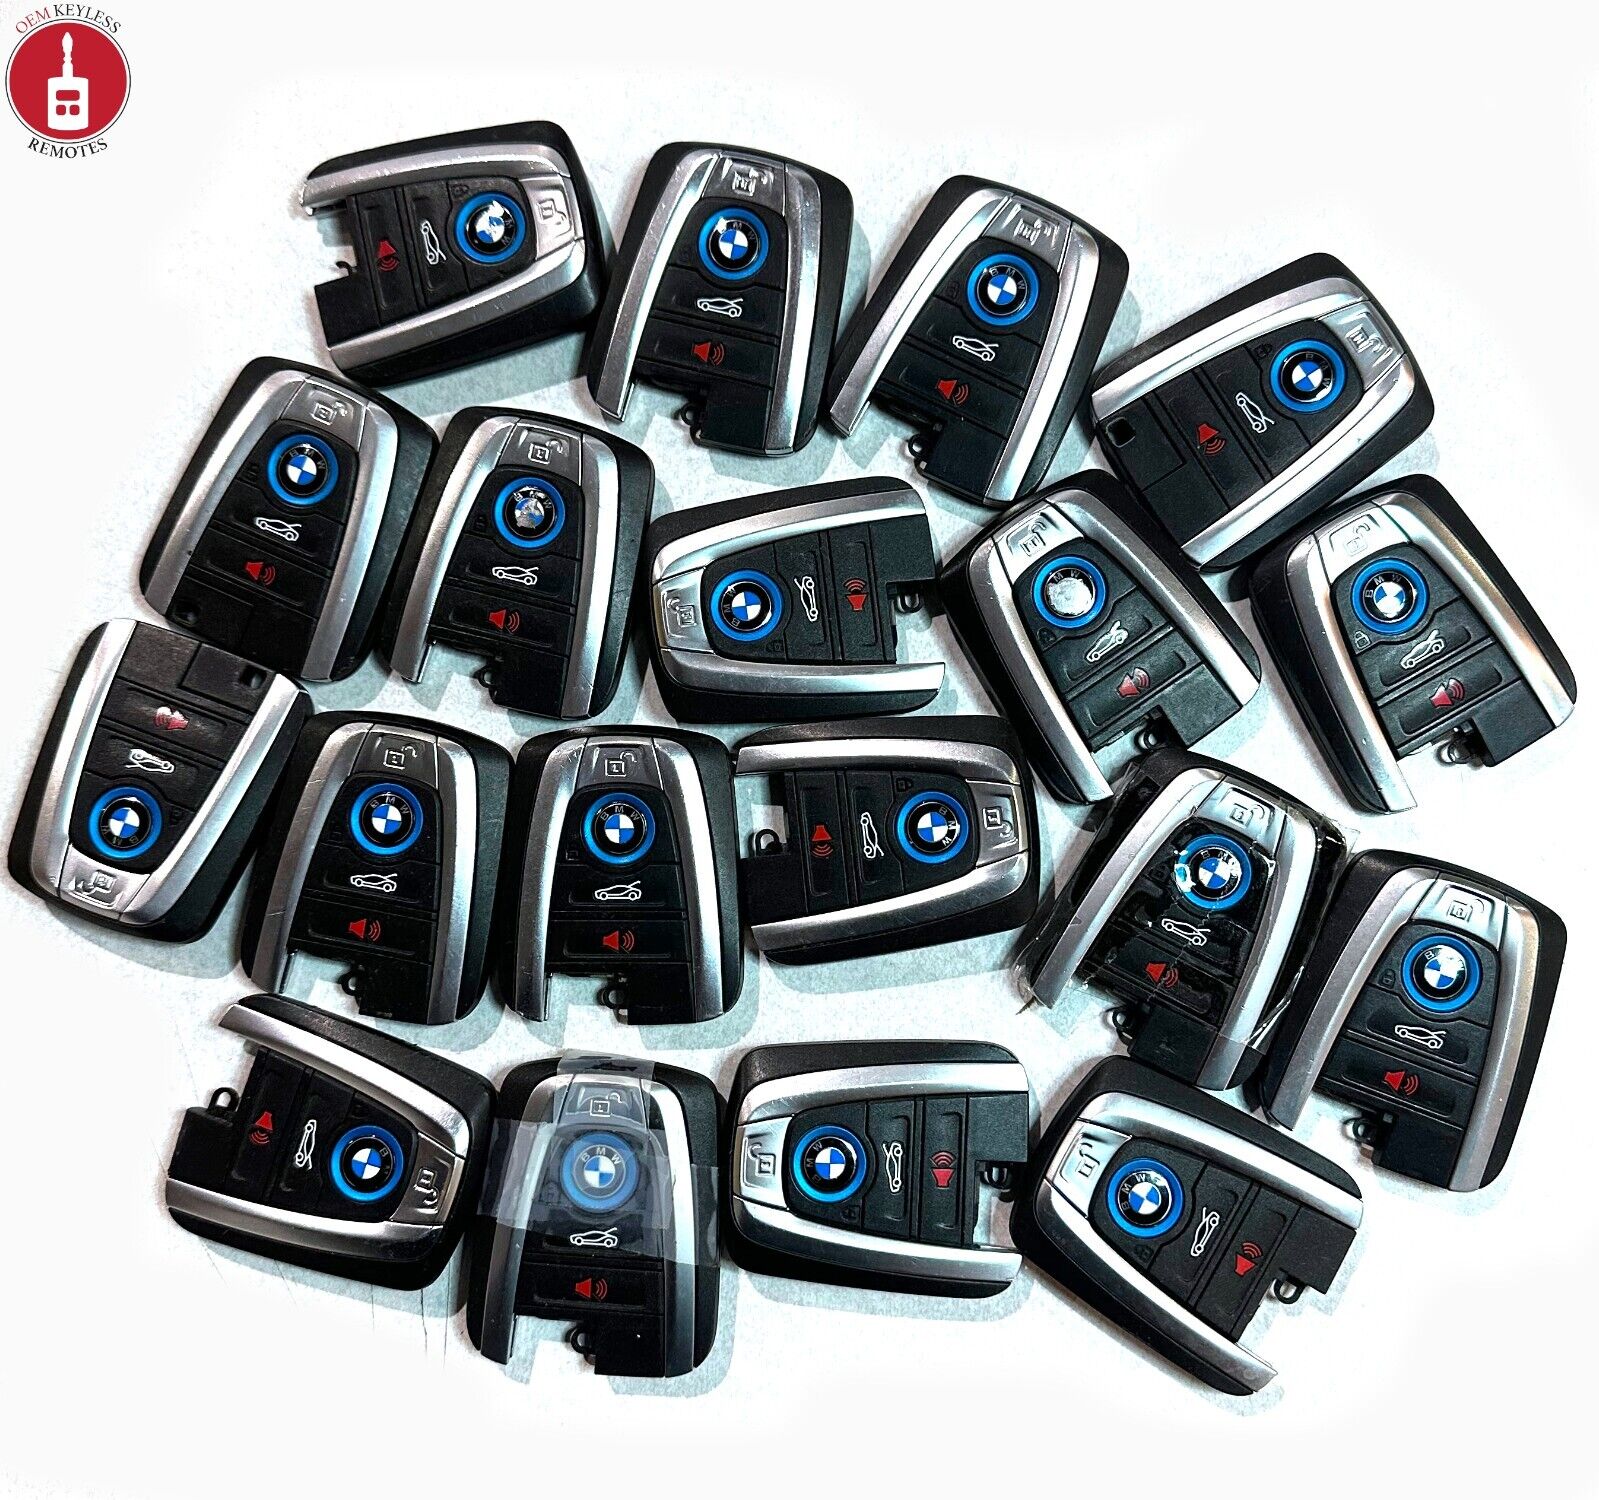 OEM Lot of 19 BMW i8 Remote Keyless Entry Smartkey Fob Replacement NBGIDGNG1